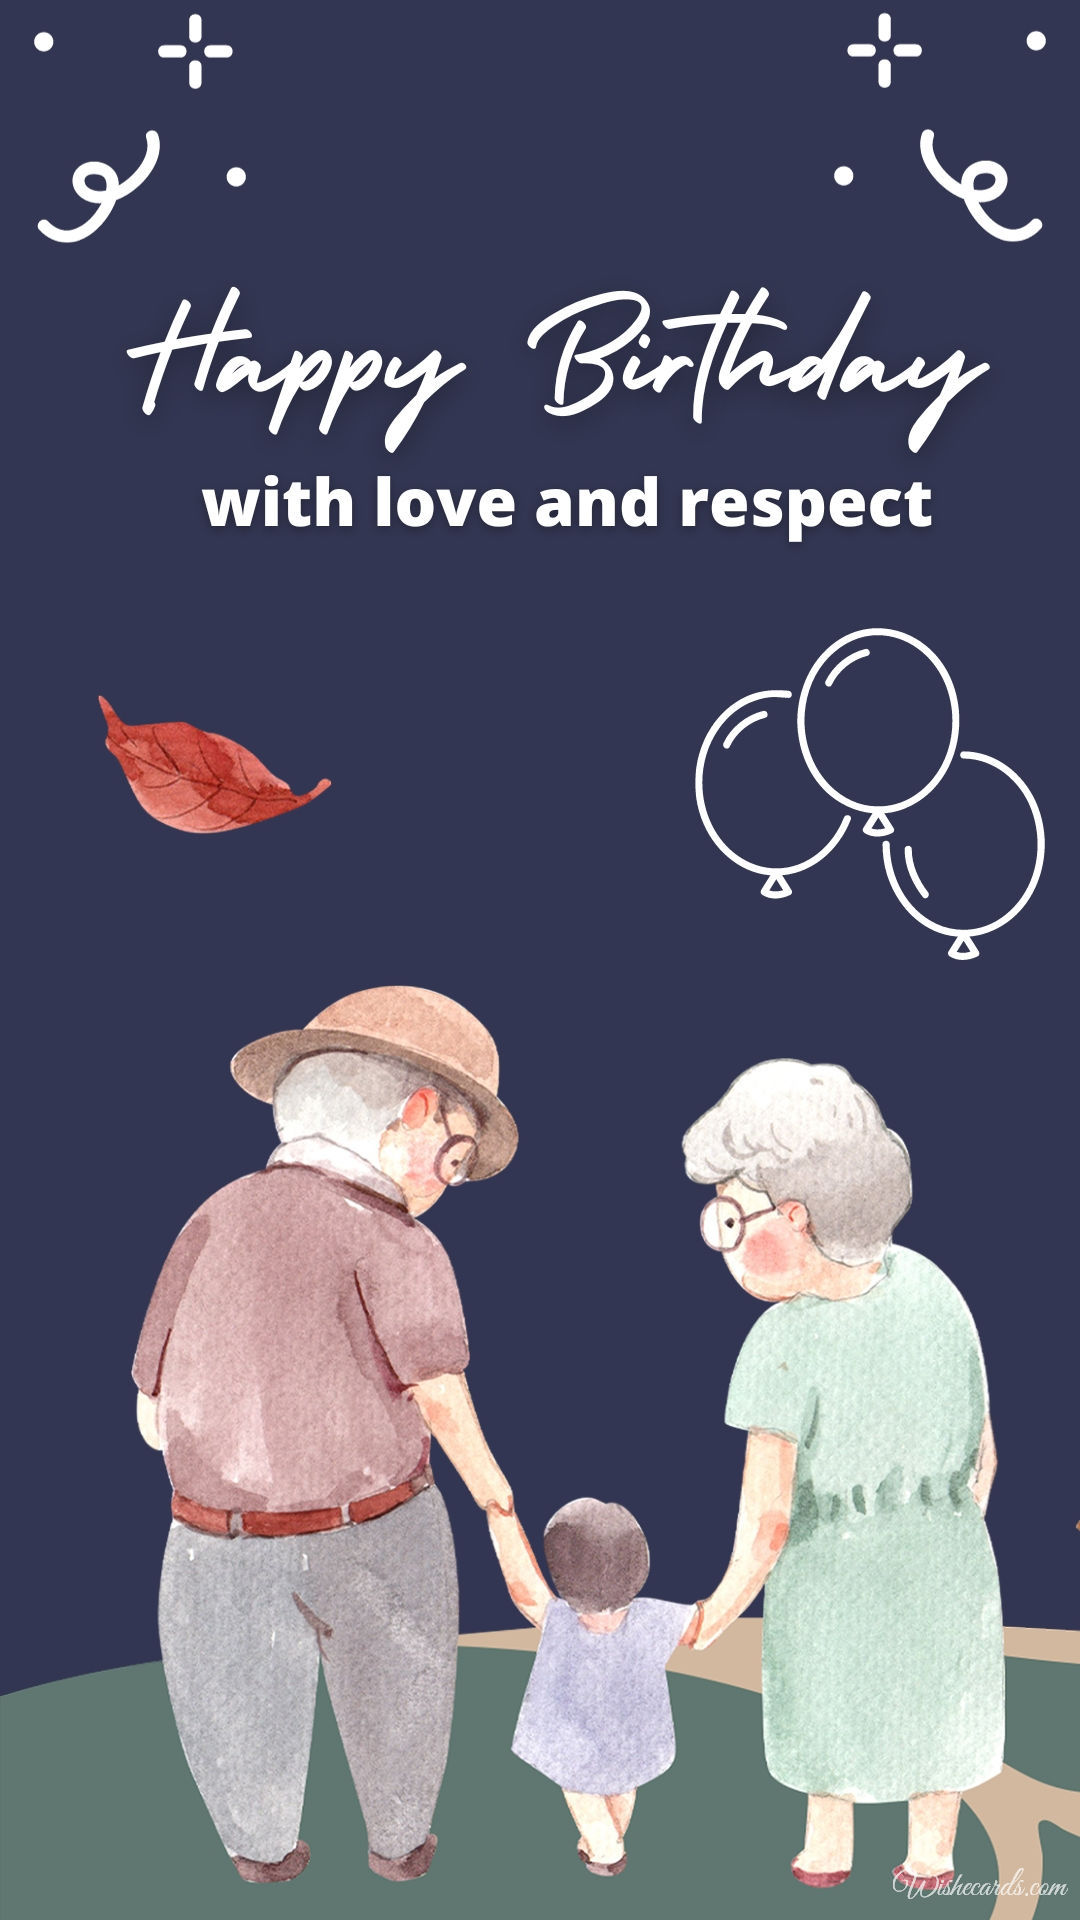 Greeting Card for Grandparents Birthday